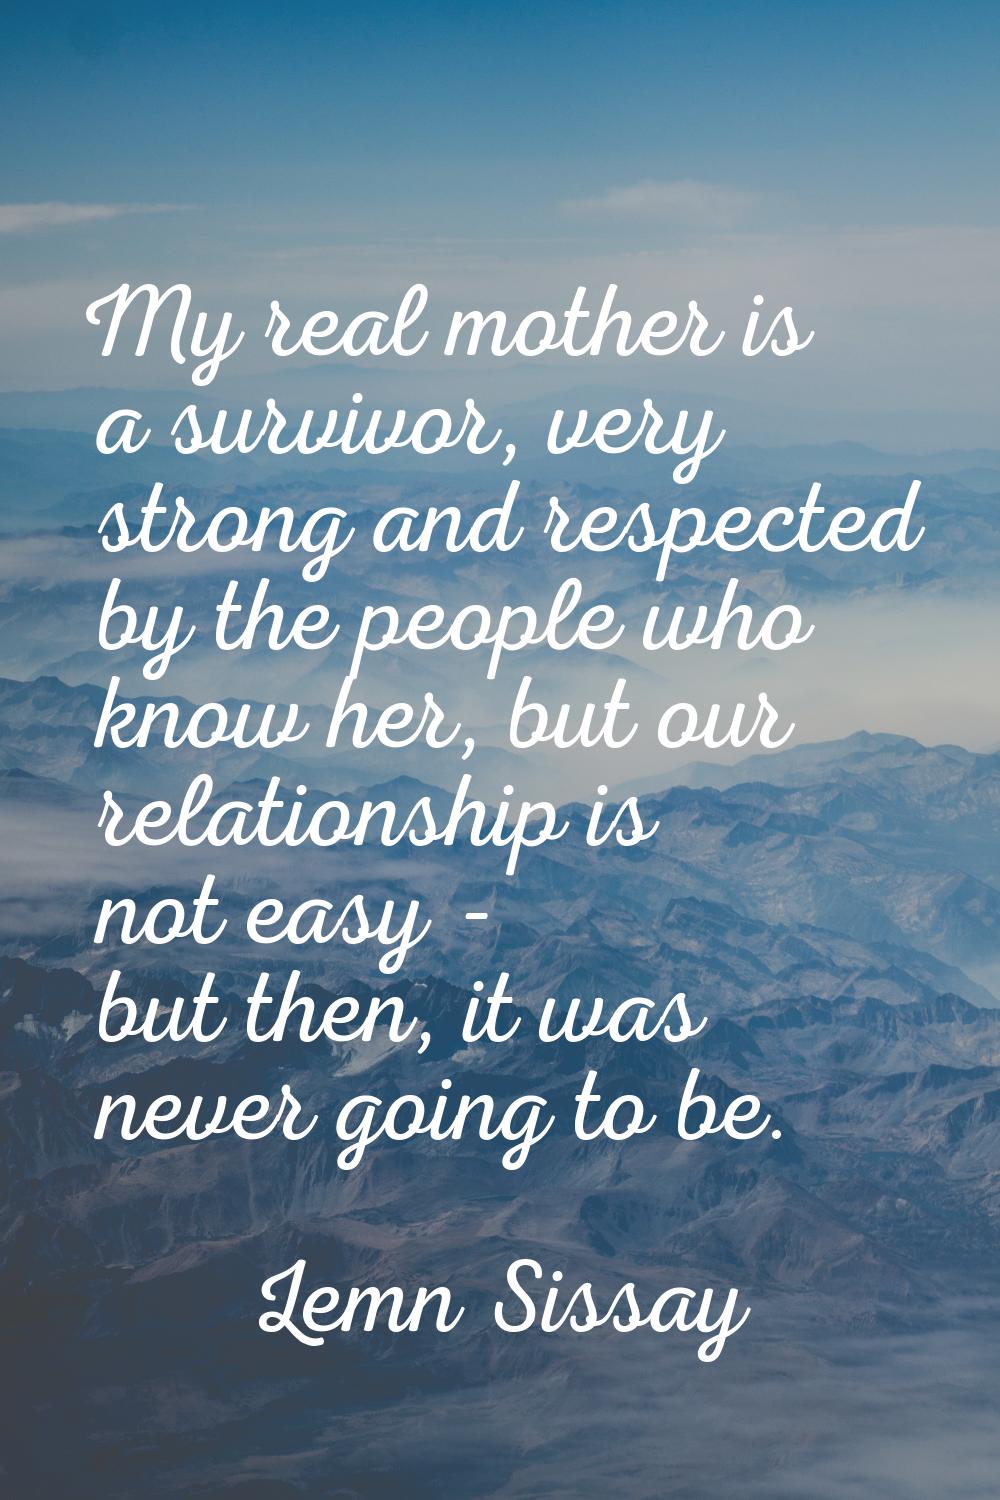 My real mother is a survivor, very strong and respected by the people who know her, but our relatio